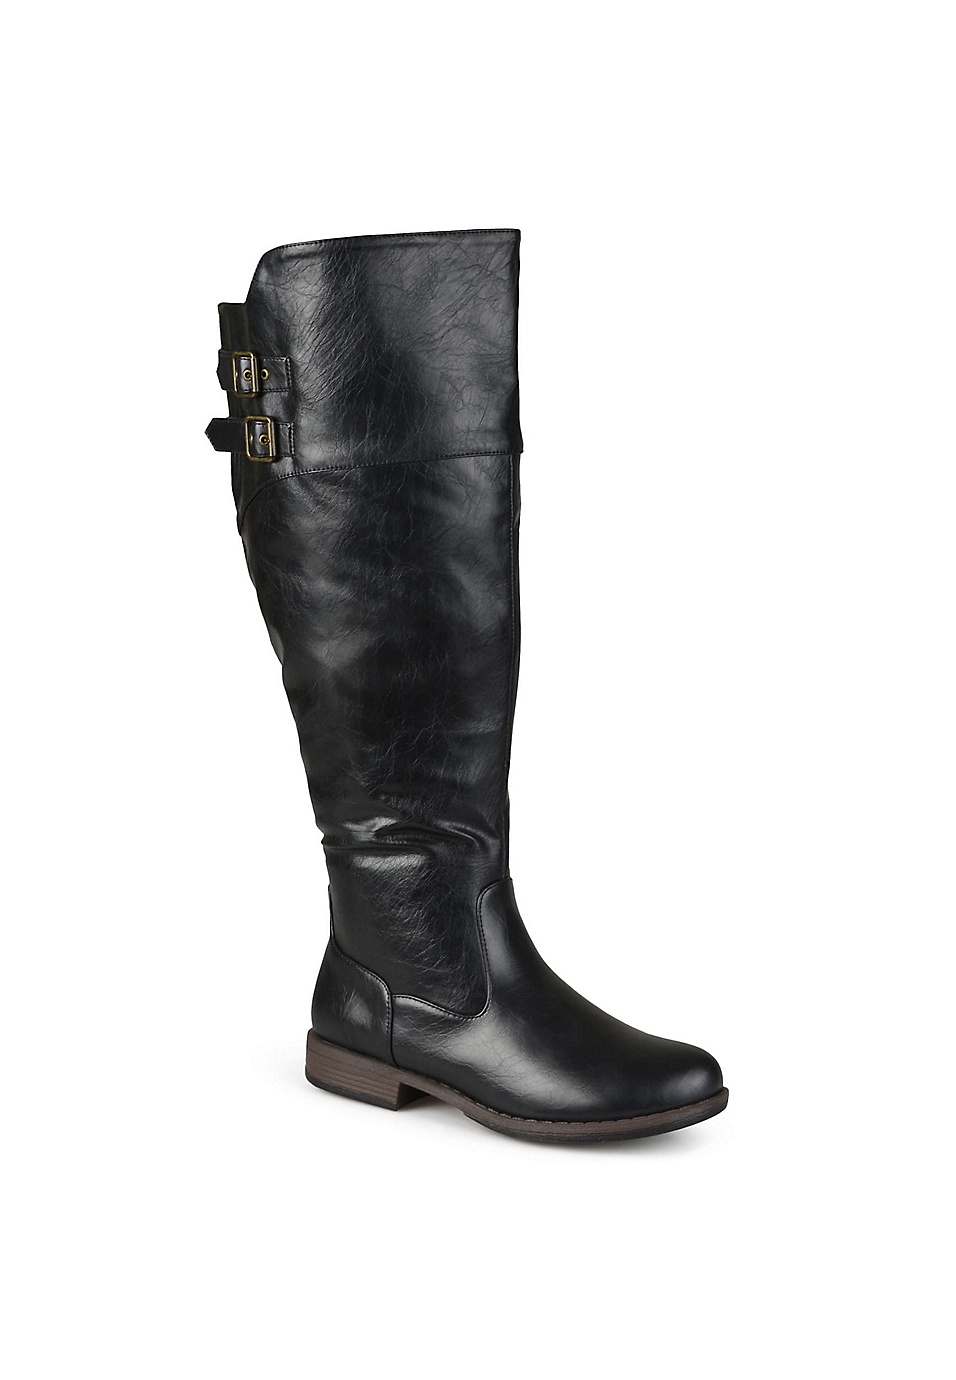 Journee Collection Tori Extra Wide Calf Boot